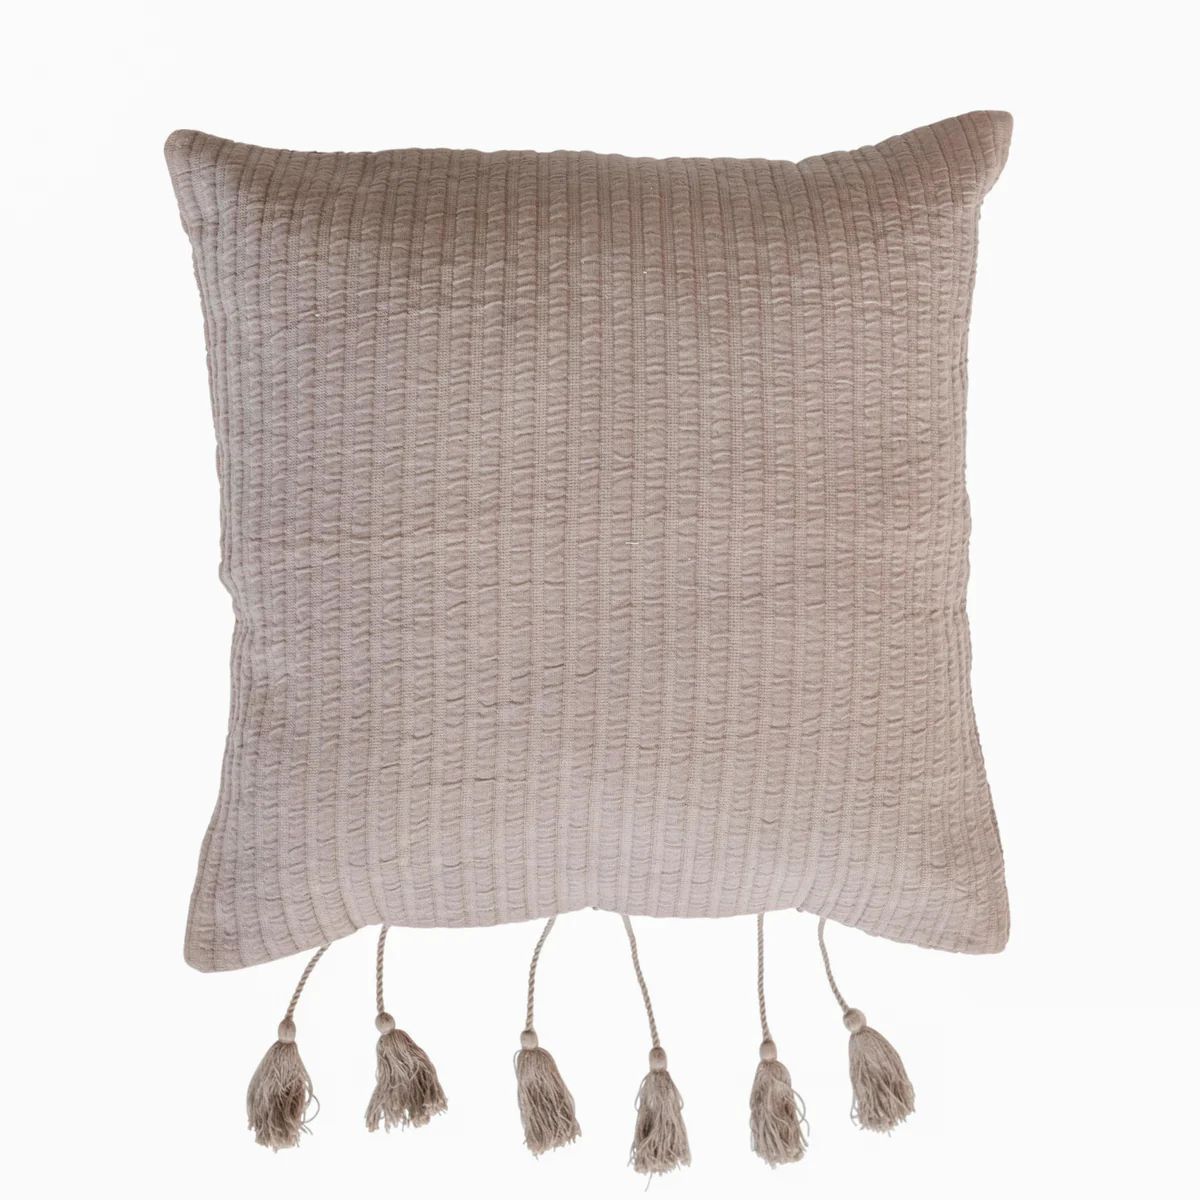 Woven Cotton Tasseled Throw Pillow in Grey | APIARY by The Busy Bee